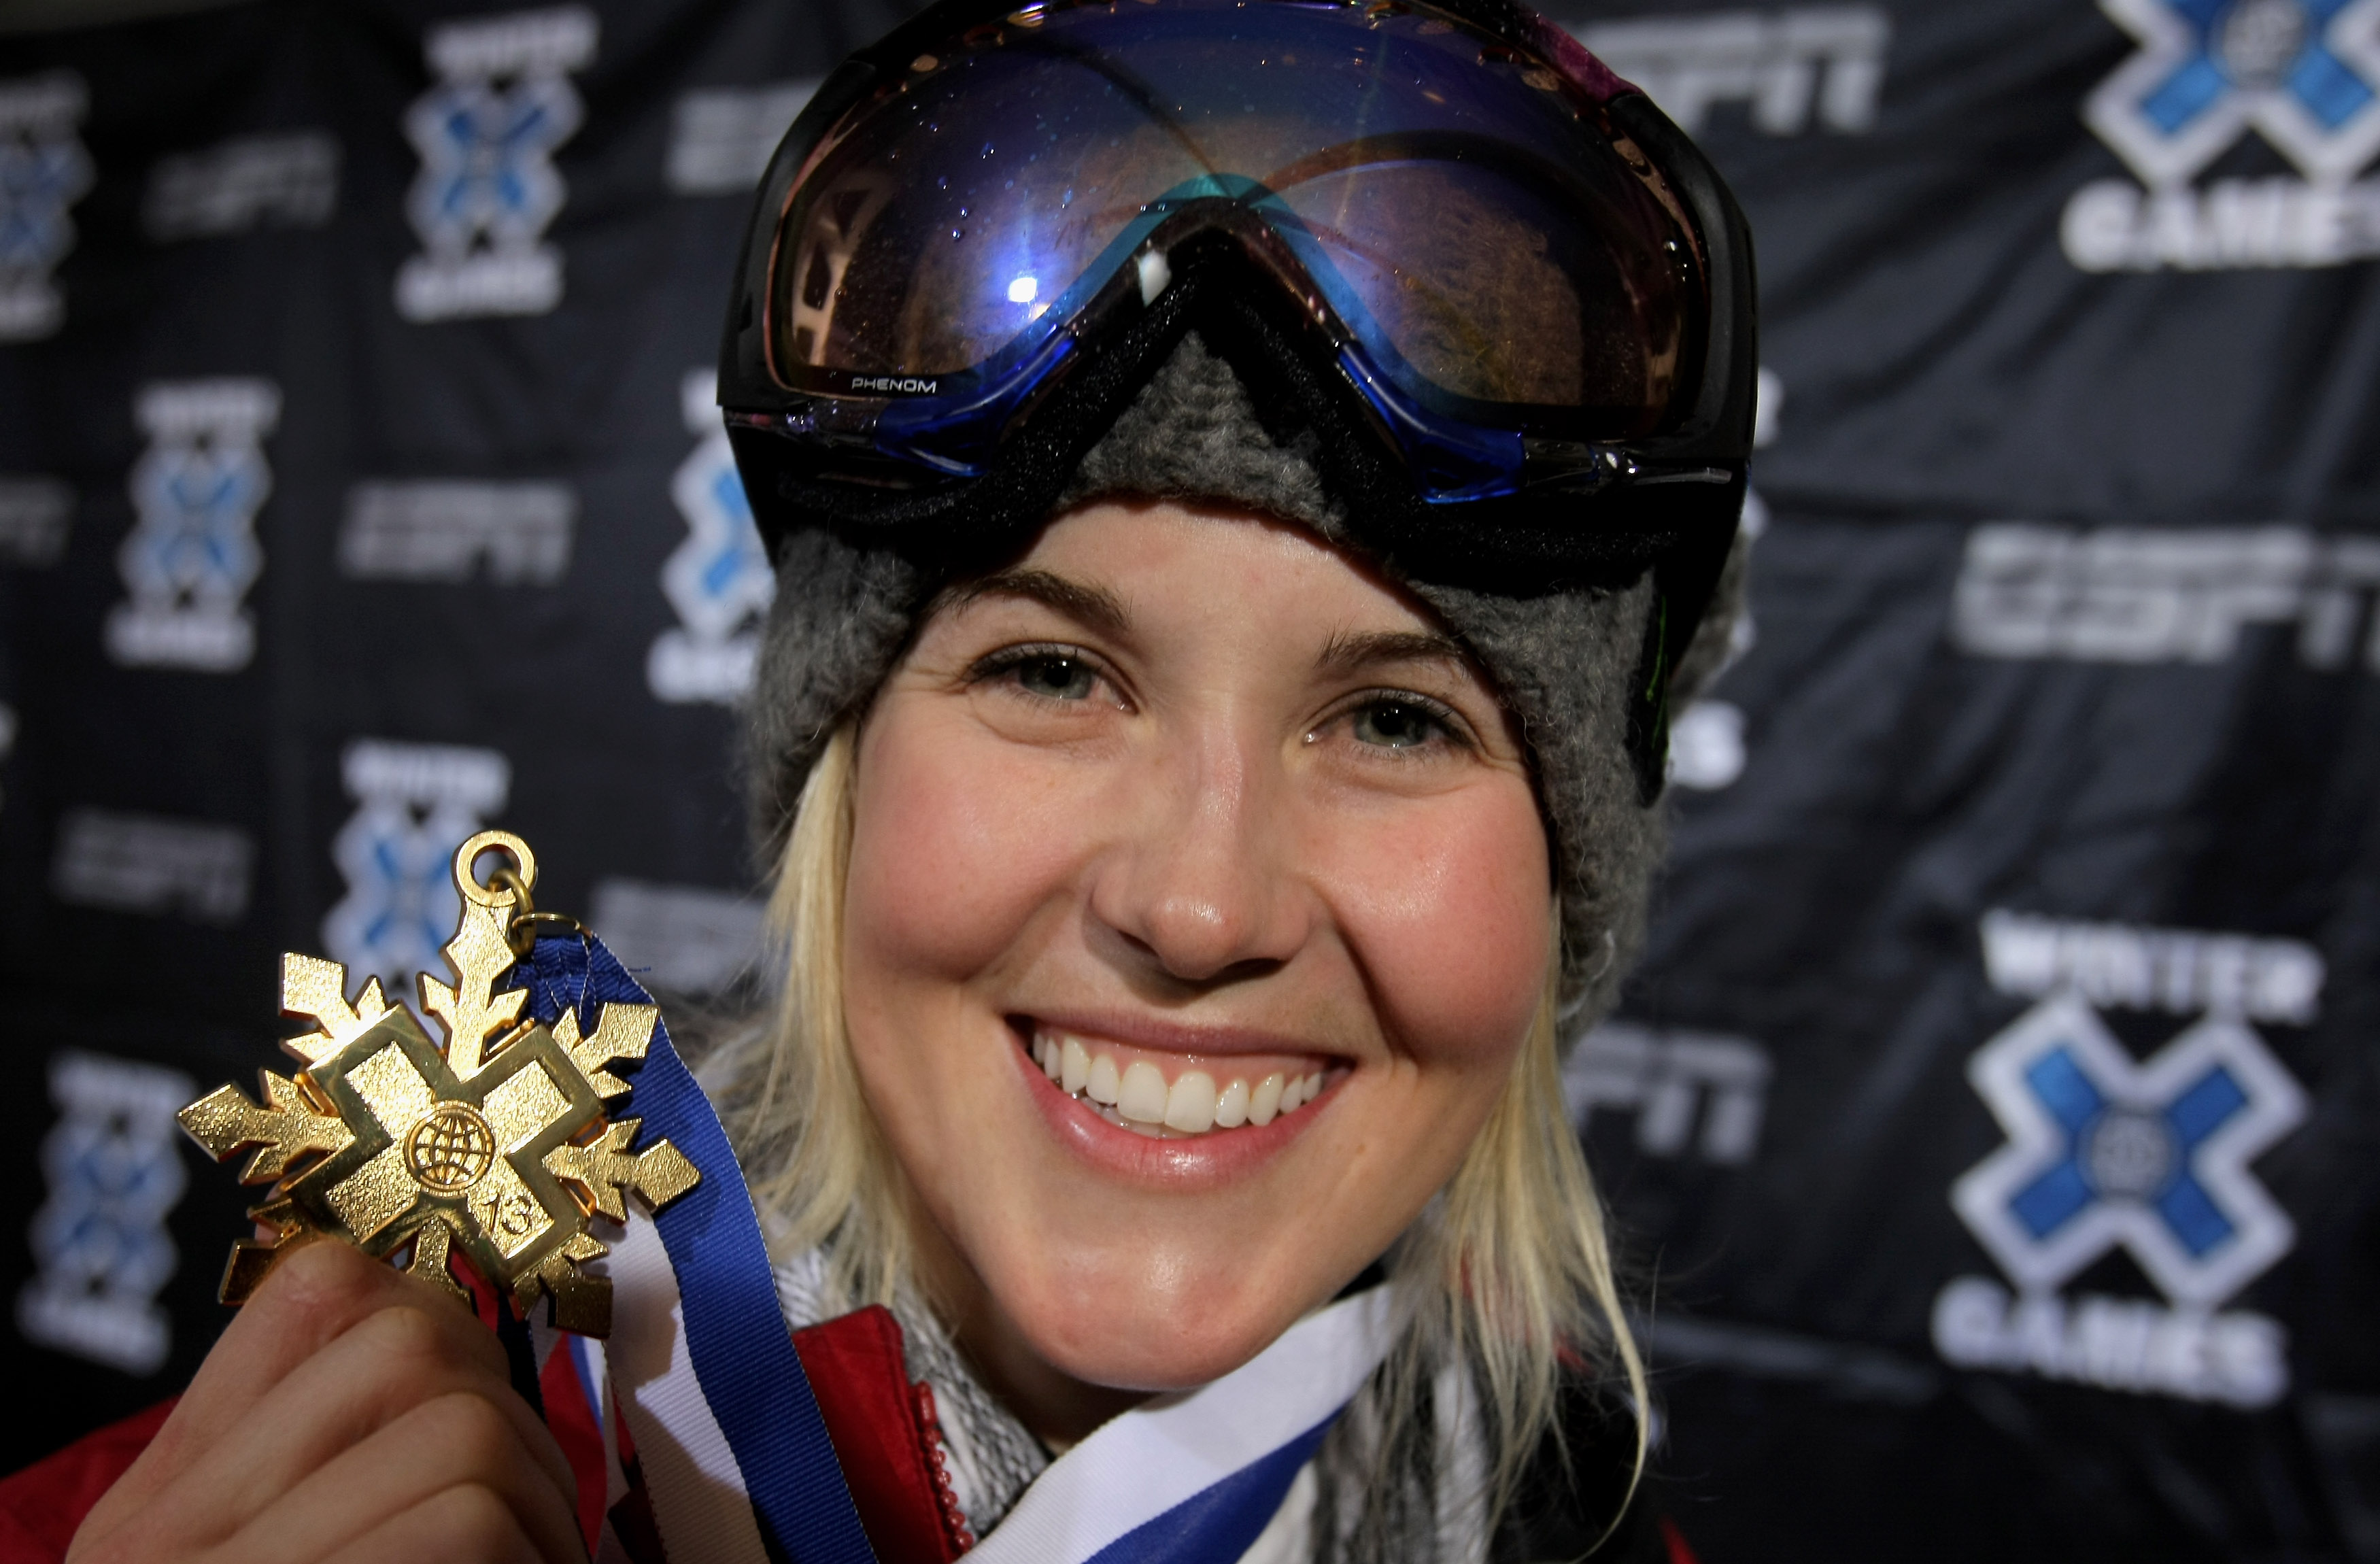 ASPEN, CO - JANUARY 23:  Sarah Burke of Whistler, Canada poses with her gold medal after winning the Women's Skiing Superpipe at Winter X Games 13 on Buttermilk Mountain on January 23, 2009 in Aspen, Colorado.  (Photo by Doug Pensinger/Getty Images)